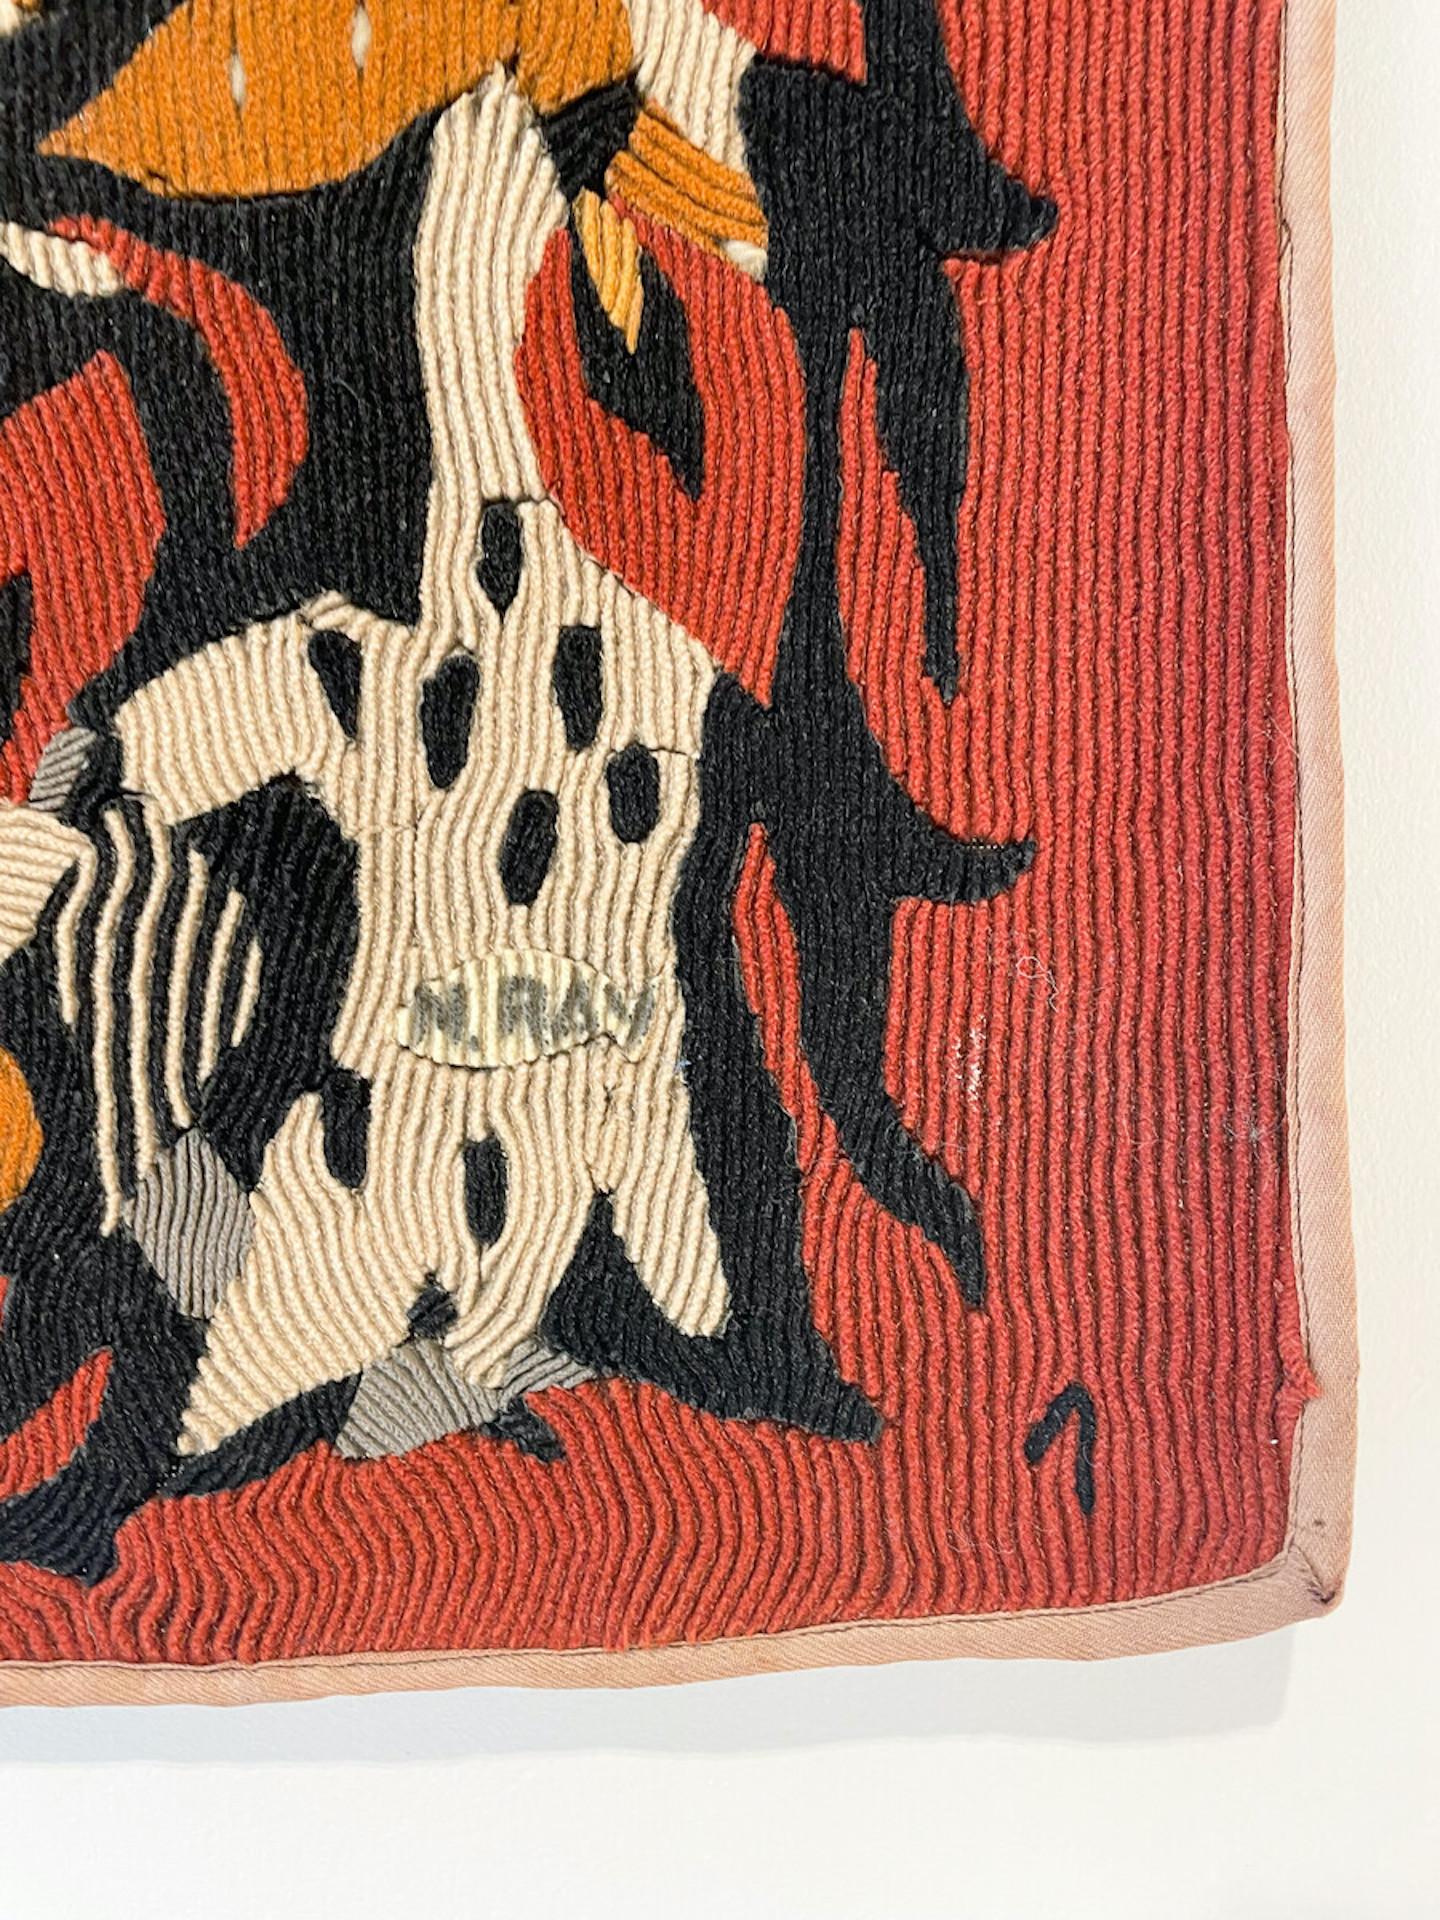 French Wool Tapestry by Michèle Ray, France, 1960s, Signed and Numbered For Sale